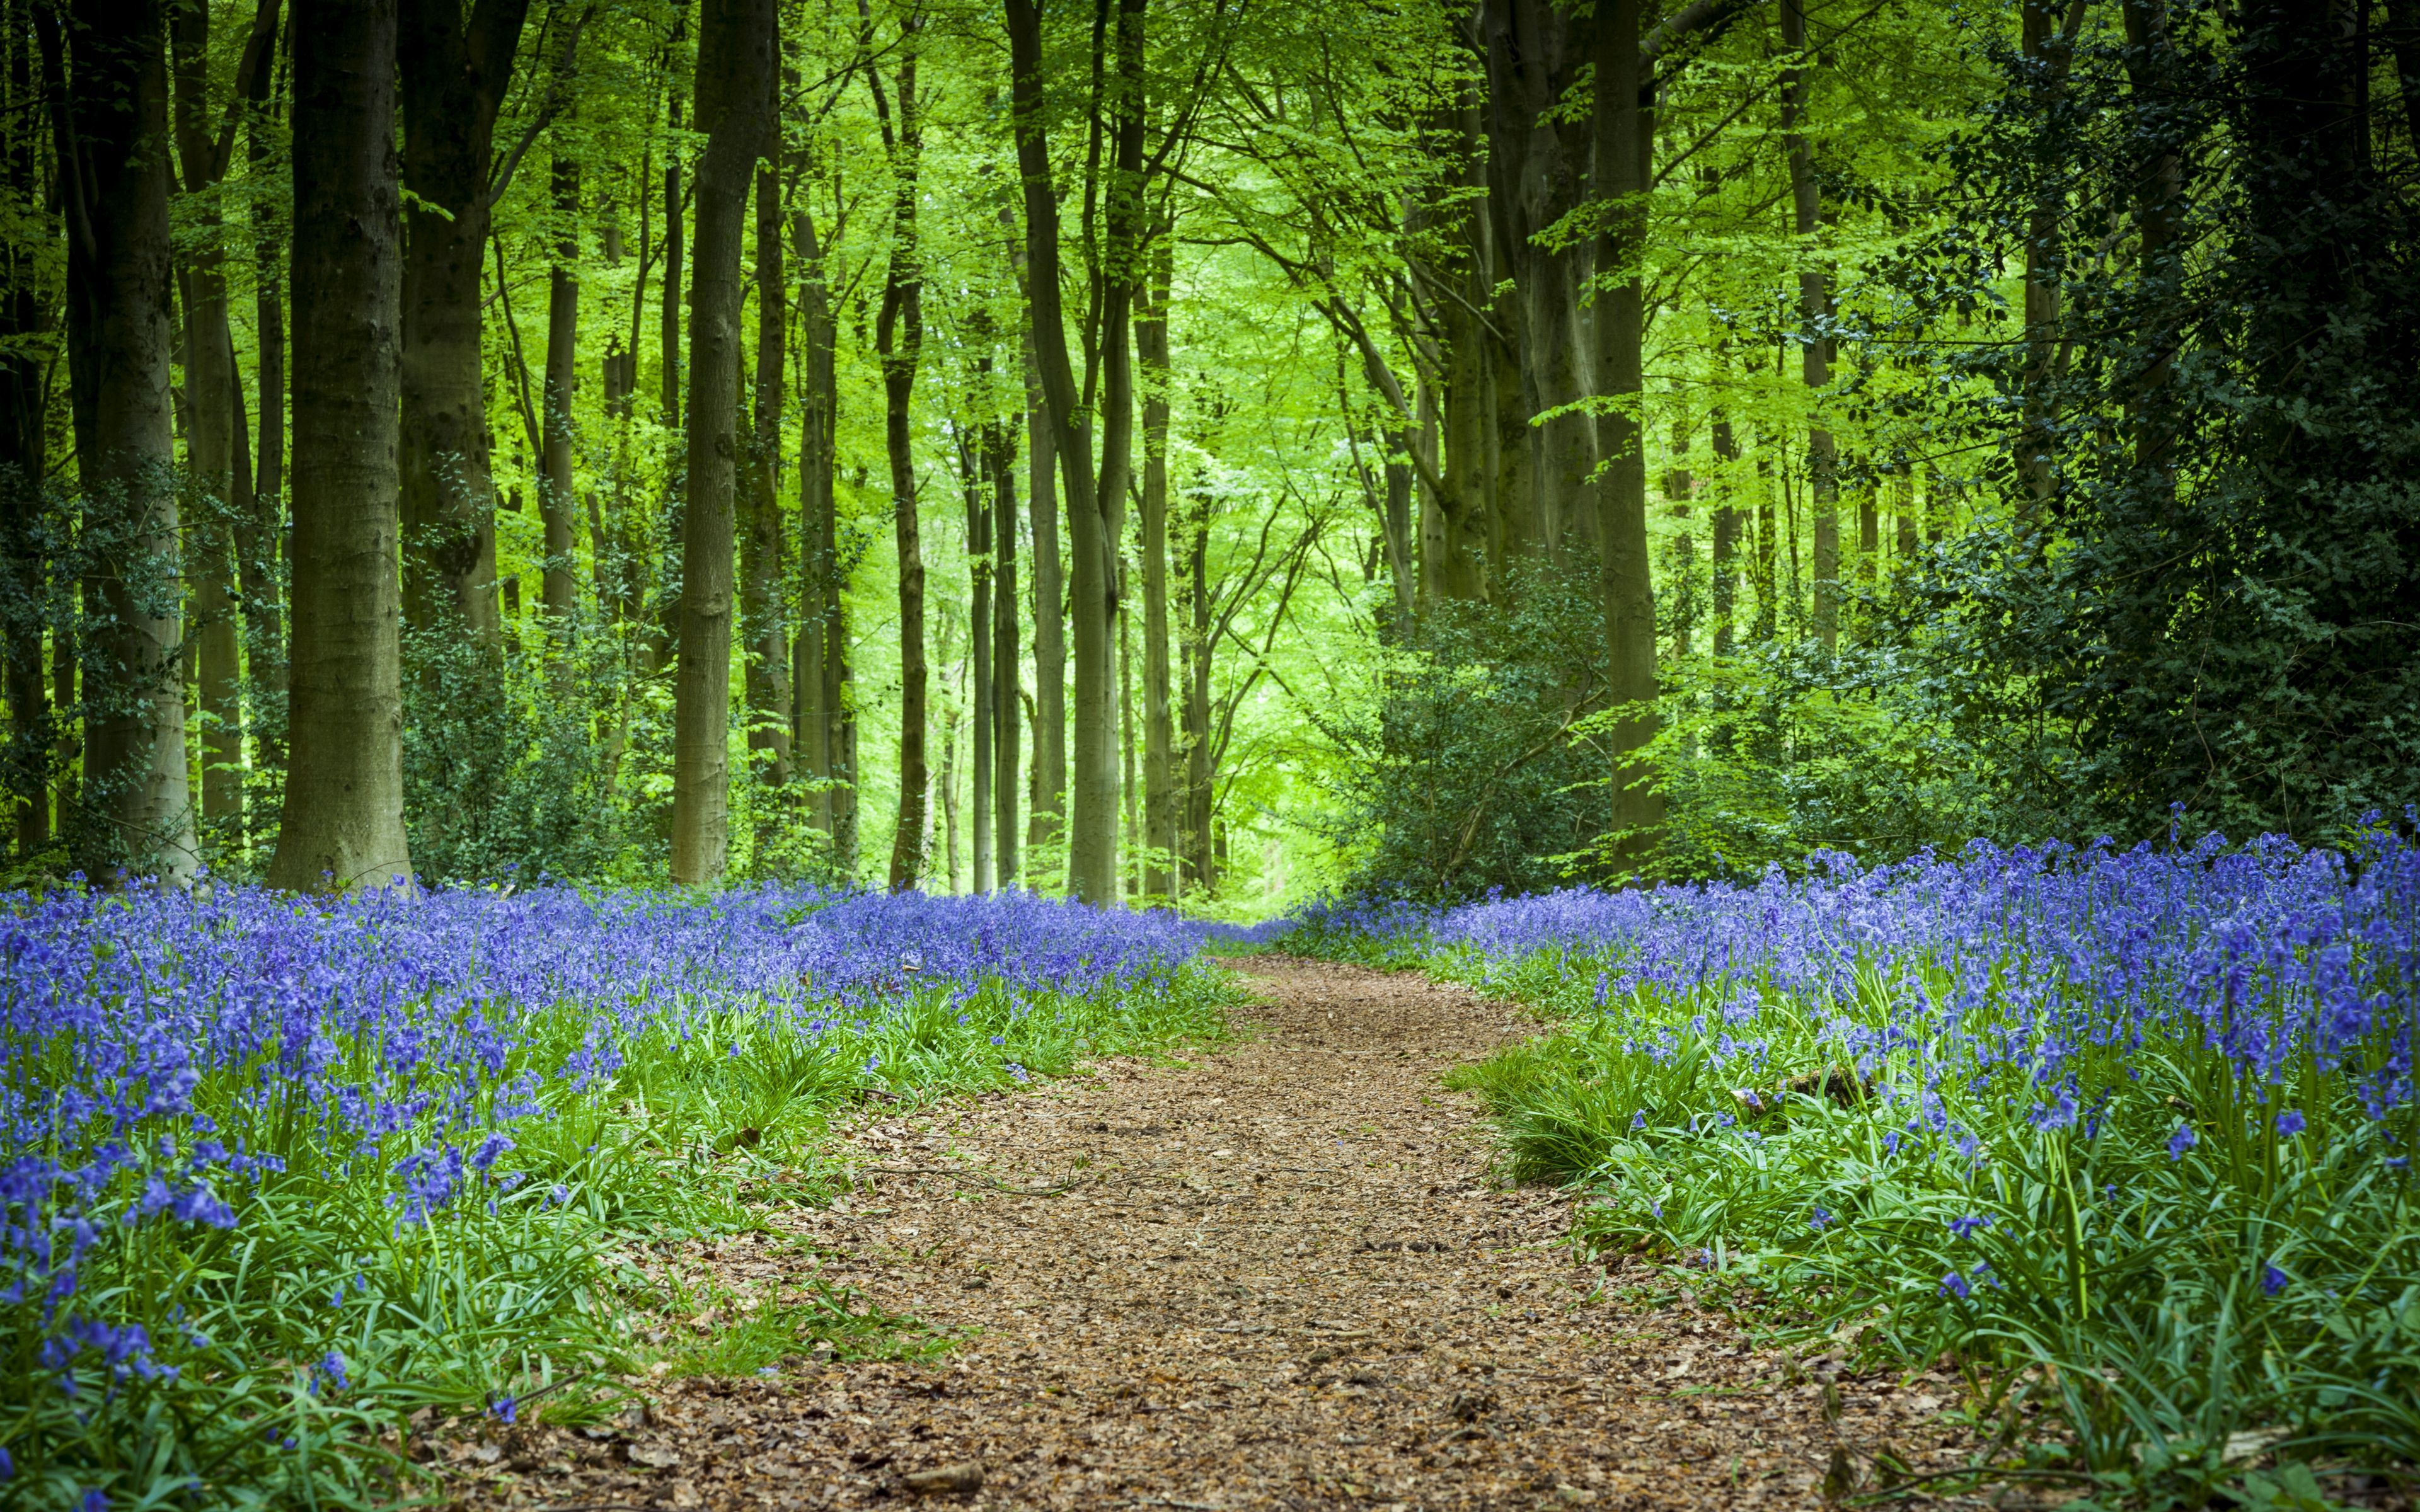 Download wallpaper 3840x2400 forest, path, flowers, spring 4k ultra HD 16:10 HD background